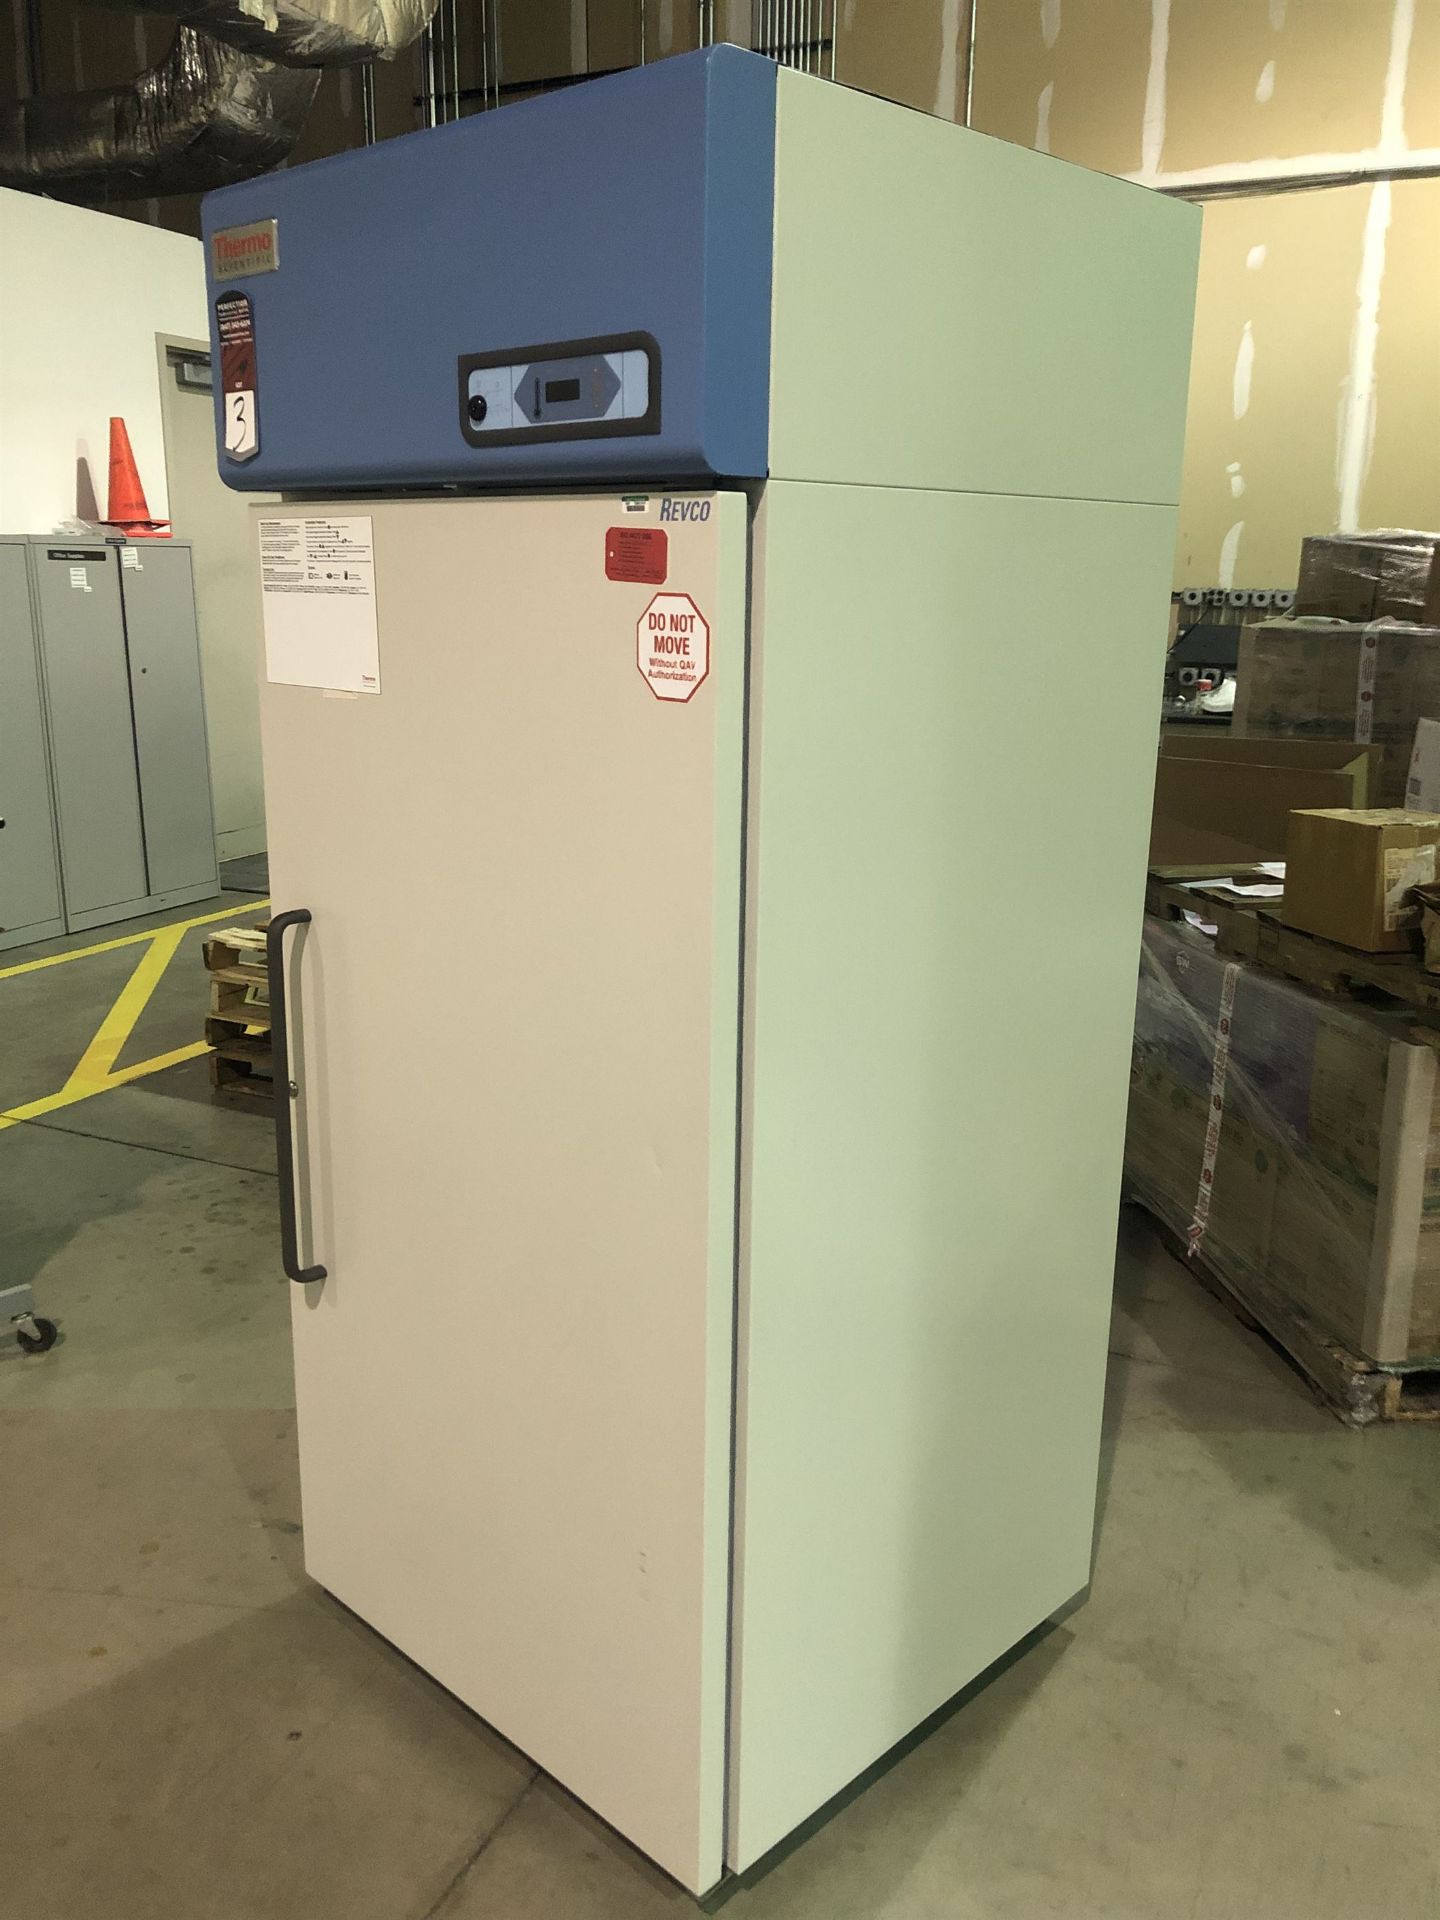 THERMO FISHER SCIENTIFIC REL3004A Commercial Laboratory Refrigerator, s/n 33004R0A0ZZDJ00A - Image 2 of 5